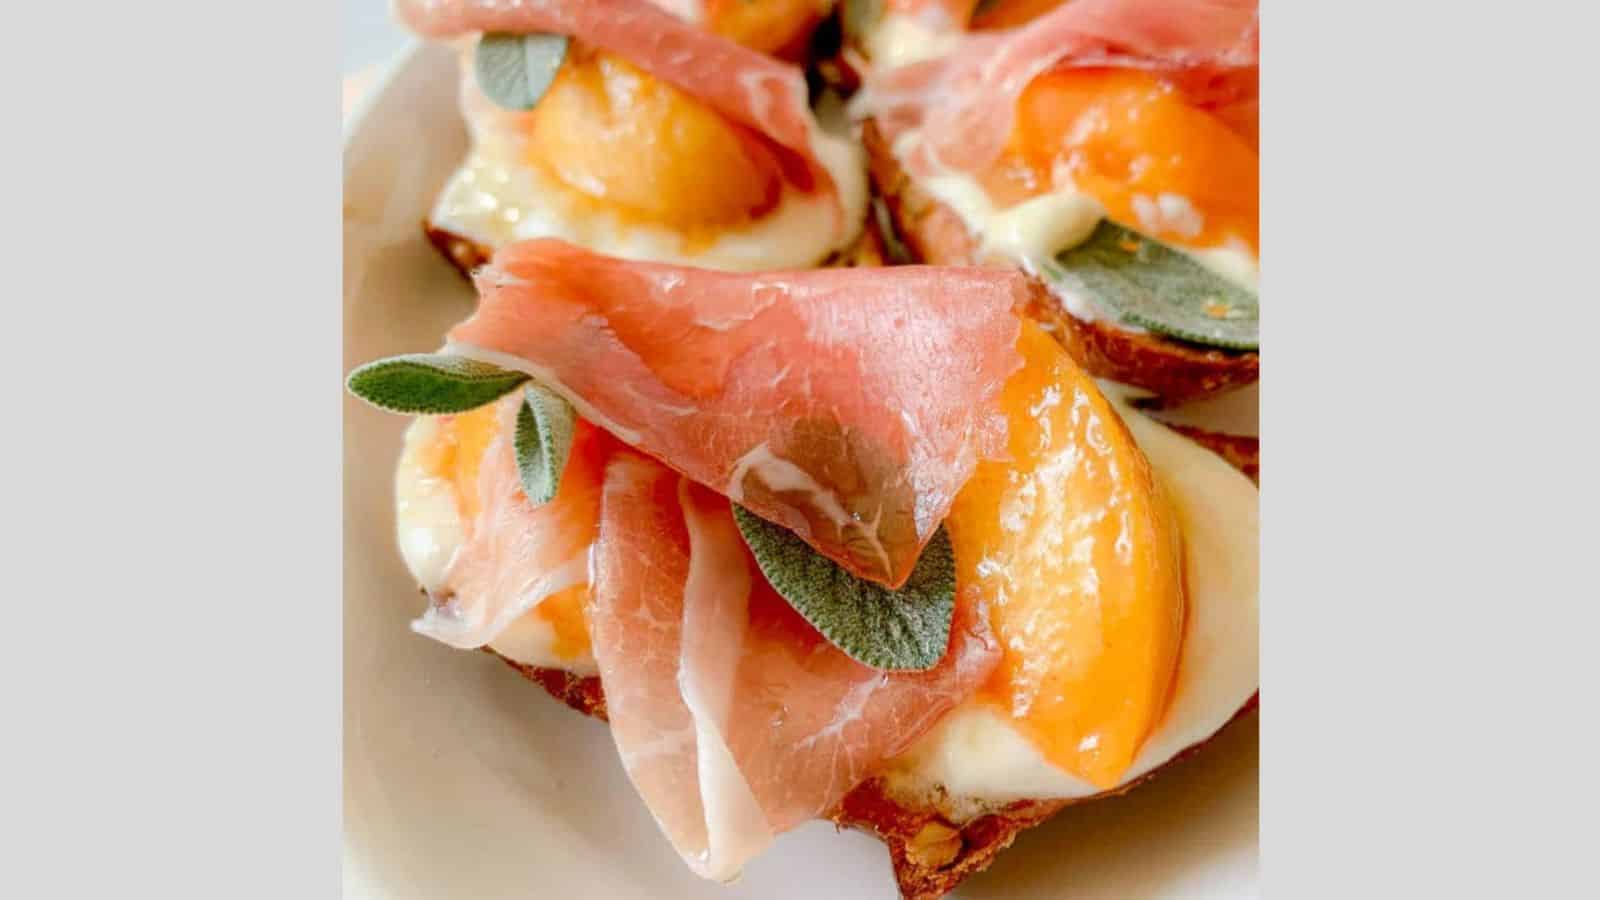 A bite sized piece of crisp bread piled high with prosciutto and peach slices and ricotta cheese.